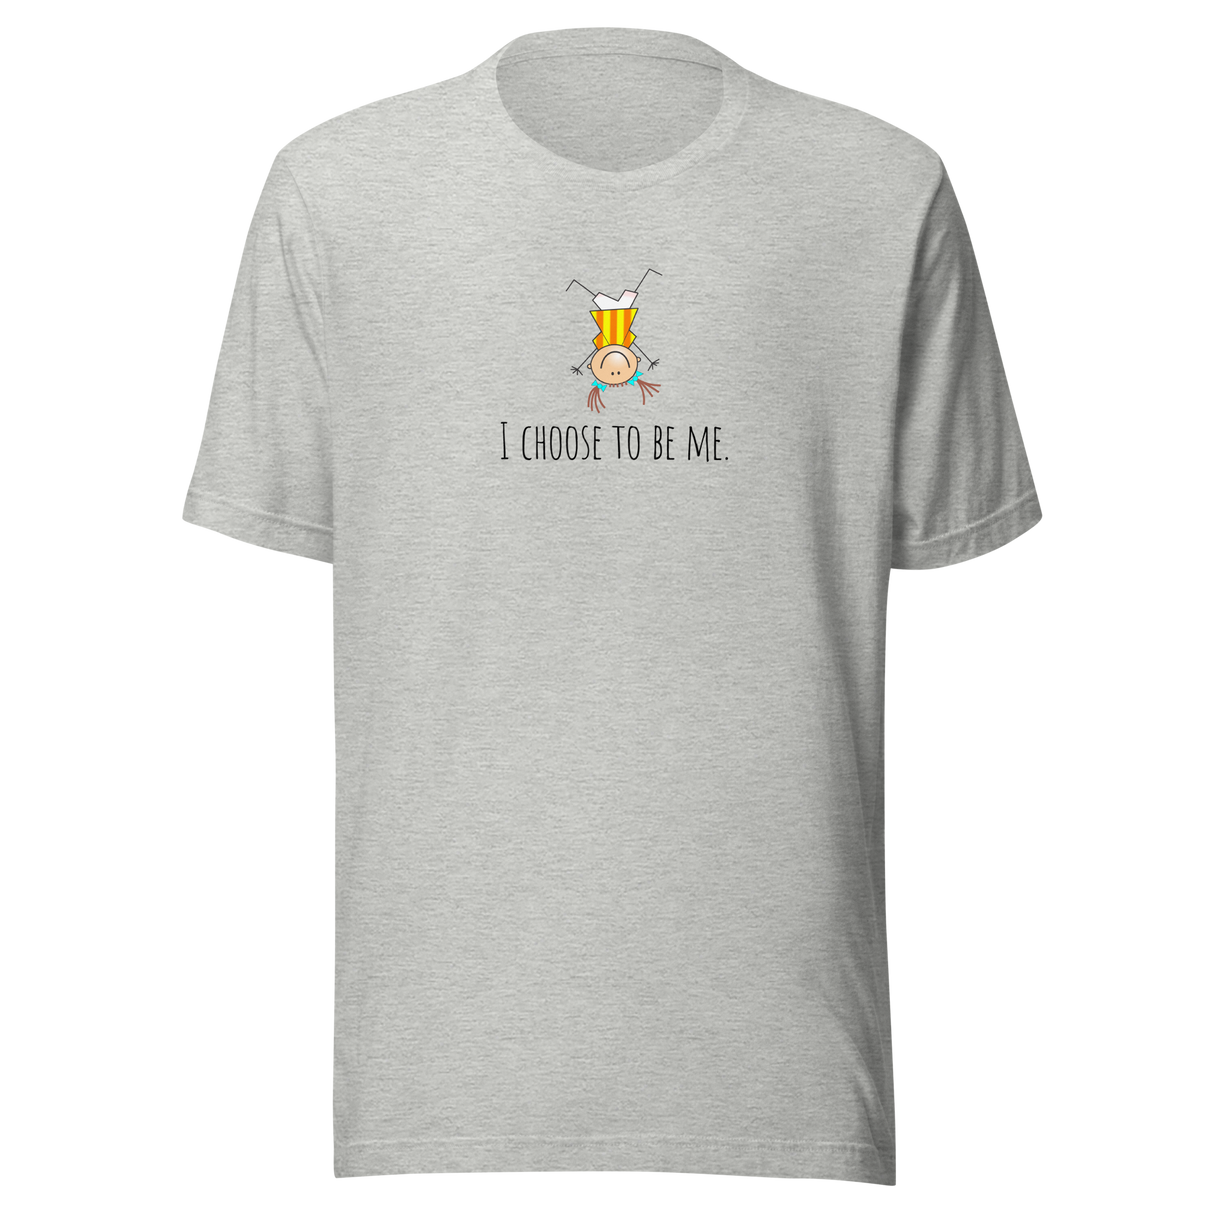 i-choose-to-be-me-happy-tee-choose-t-shirt-cool-tee-inspirational-t-shirt-lgbt-tee#color_athletic-heather